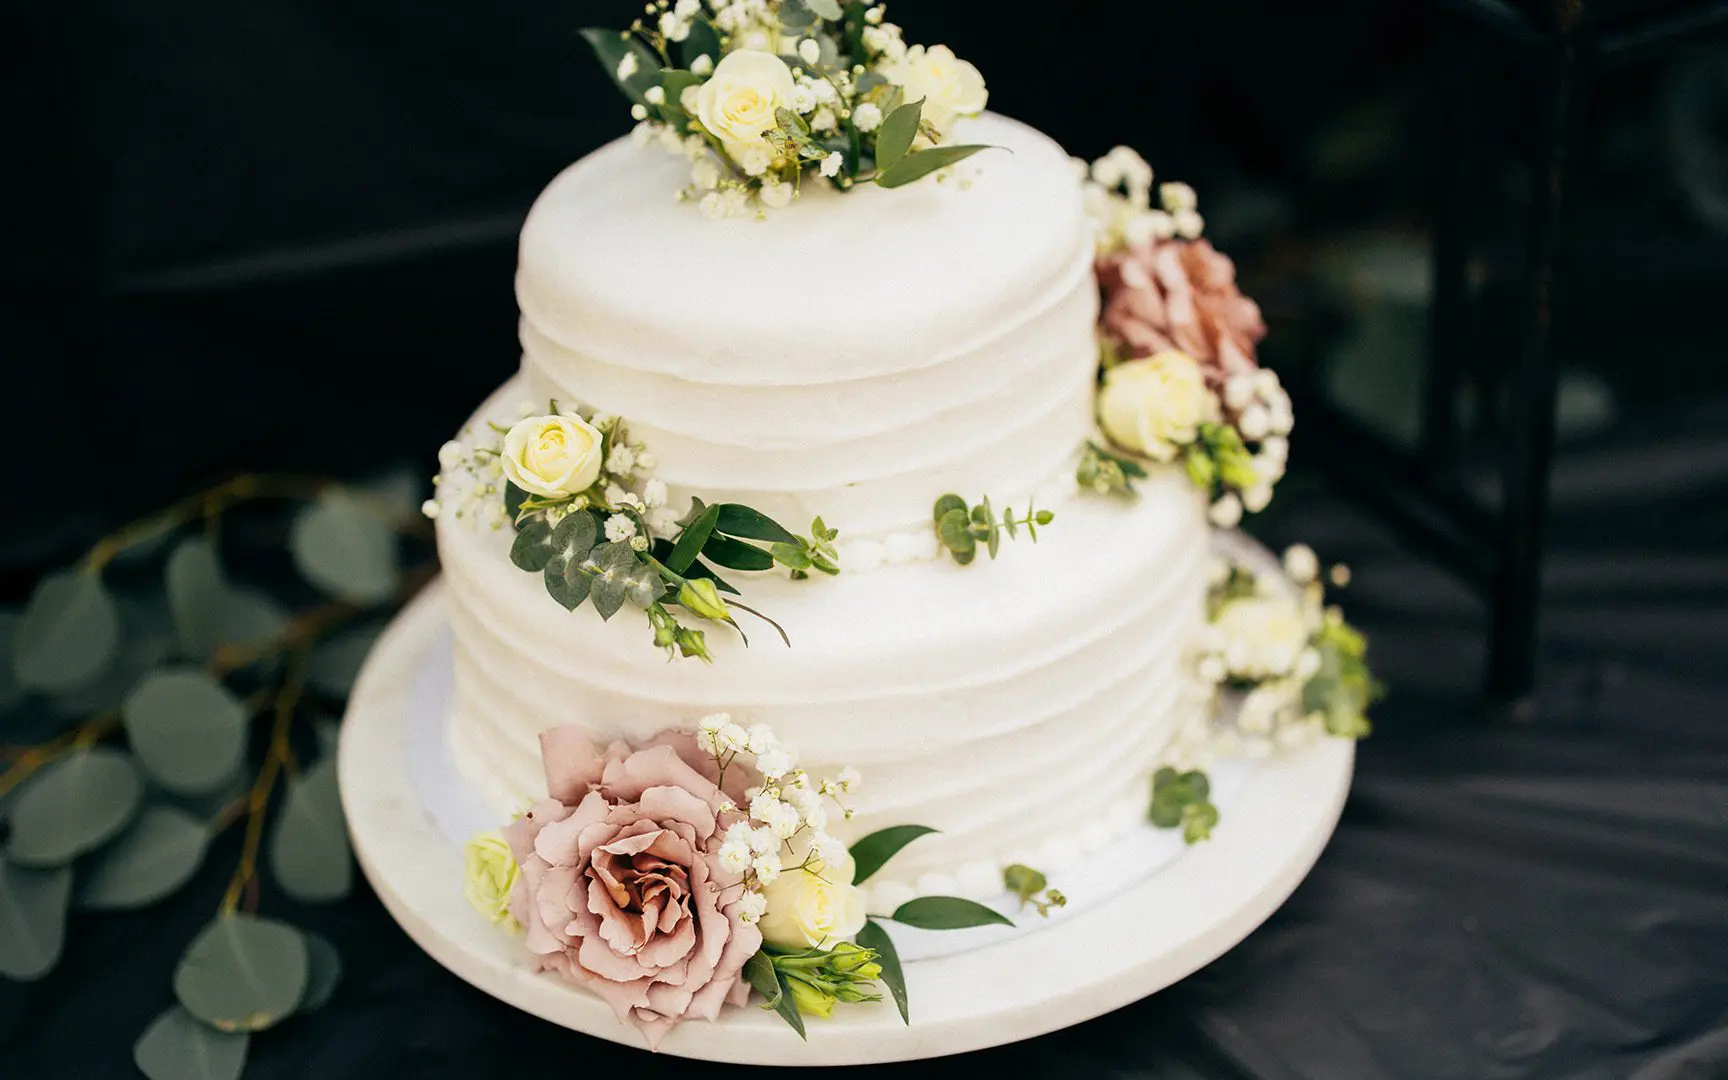 Three-tiered wedding cake adorned with creamy white icing and decorated with pink and yellow roses, displayed on a white stand.